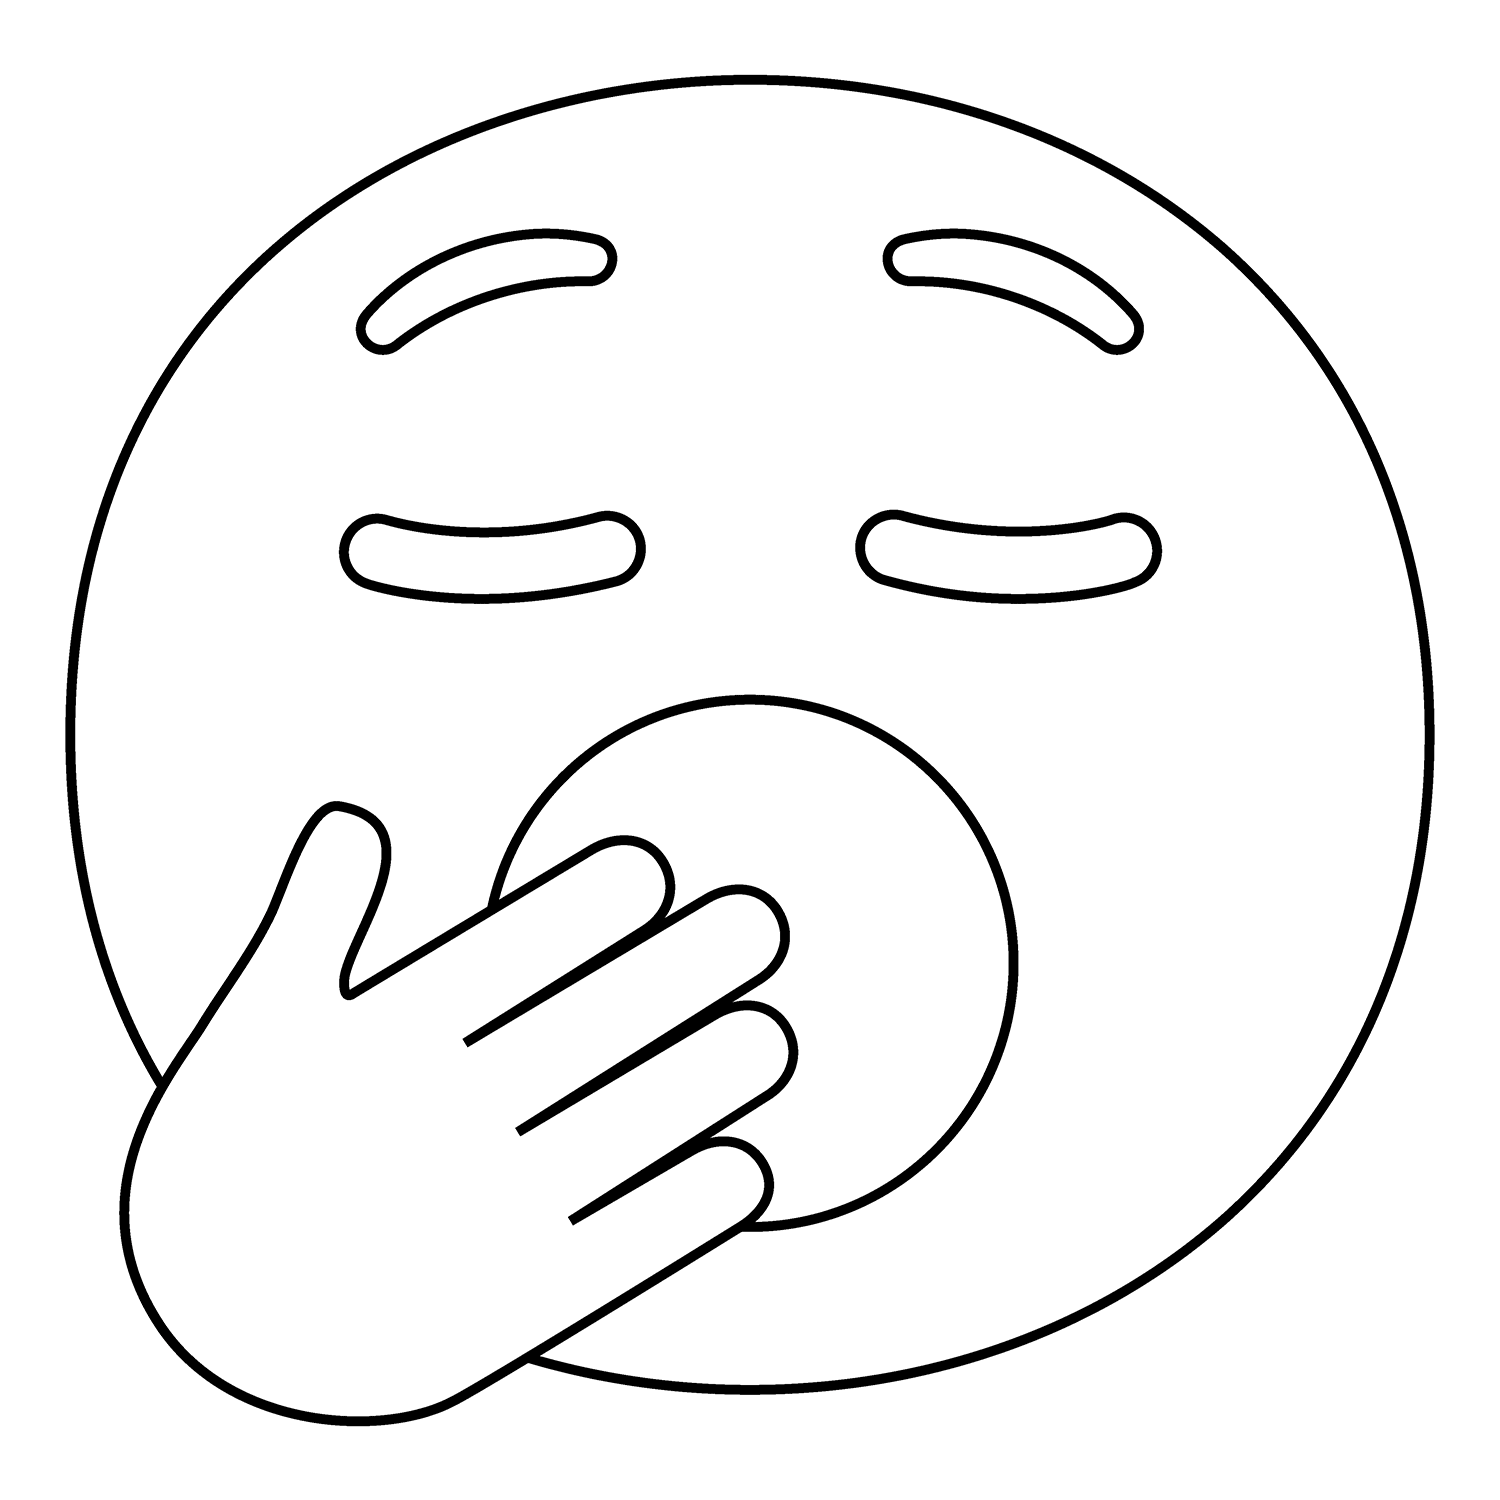 Yawning Face Emoji coloring page - ColouringPages